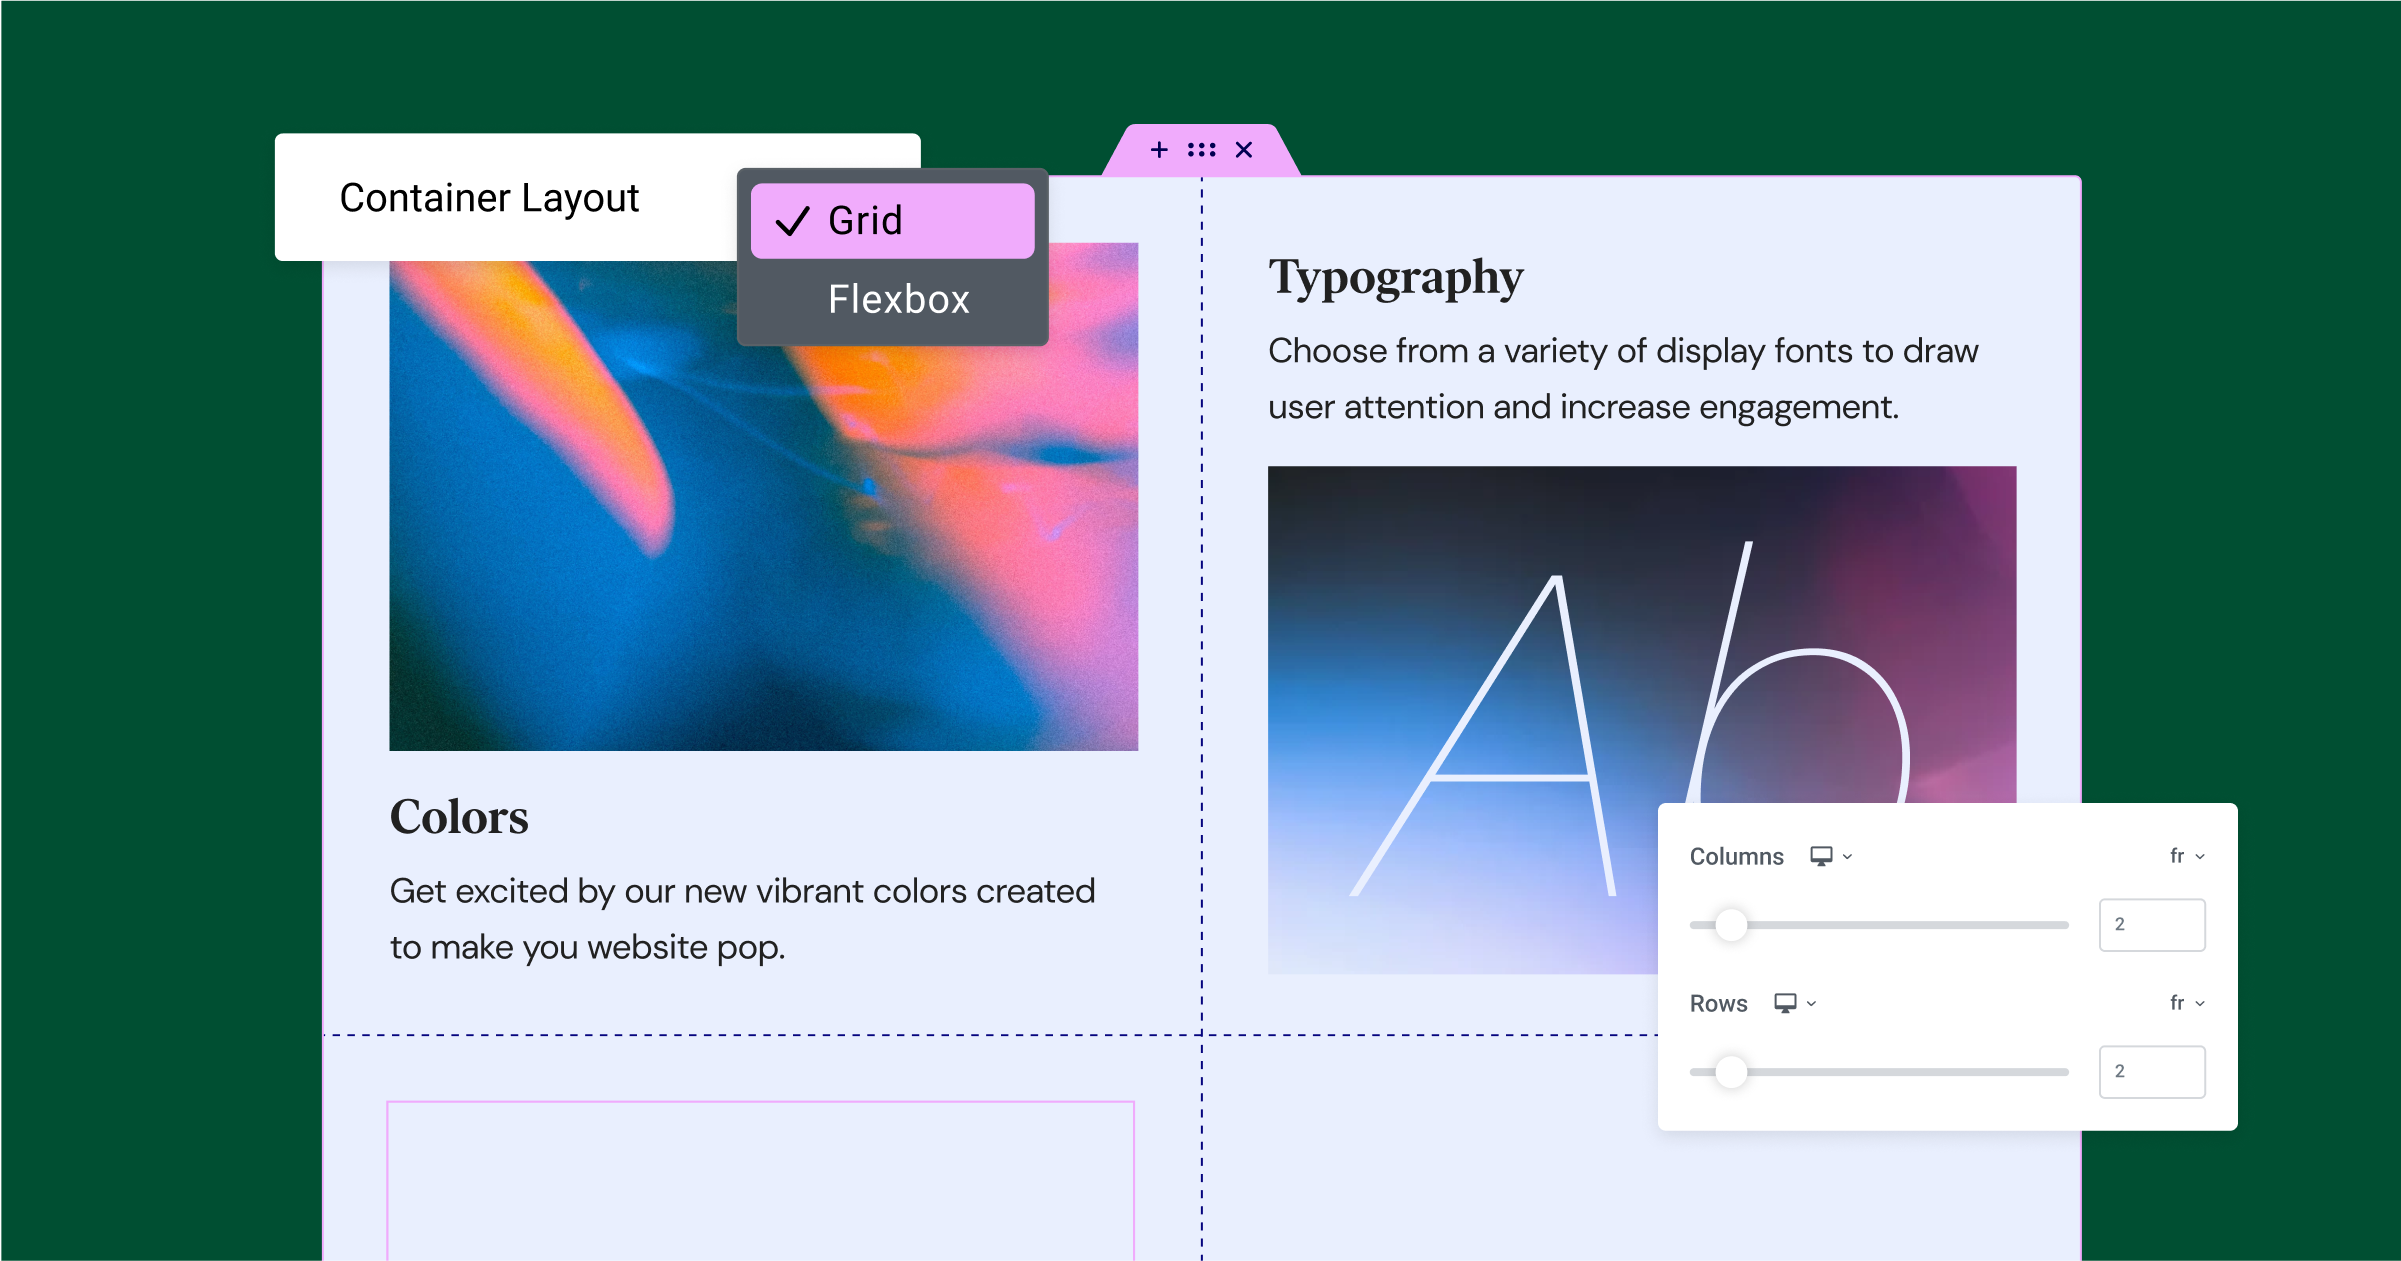 Container Css Grid Introducing Elementor 3.13 – Build Lean, And Flexible Website Layouts With Css Grid 1